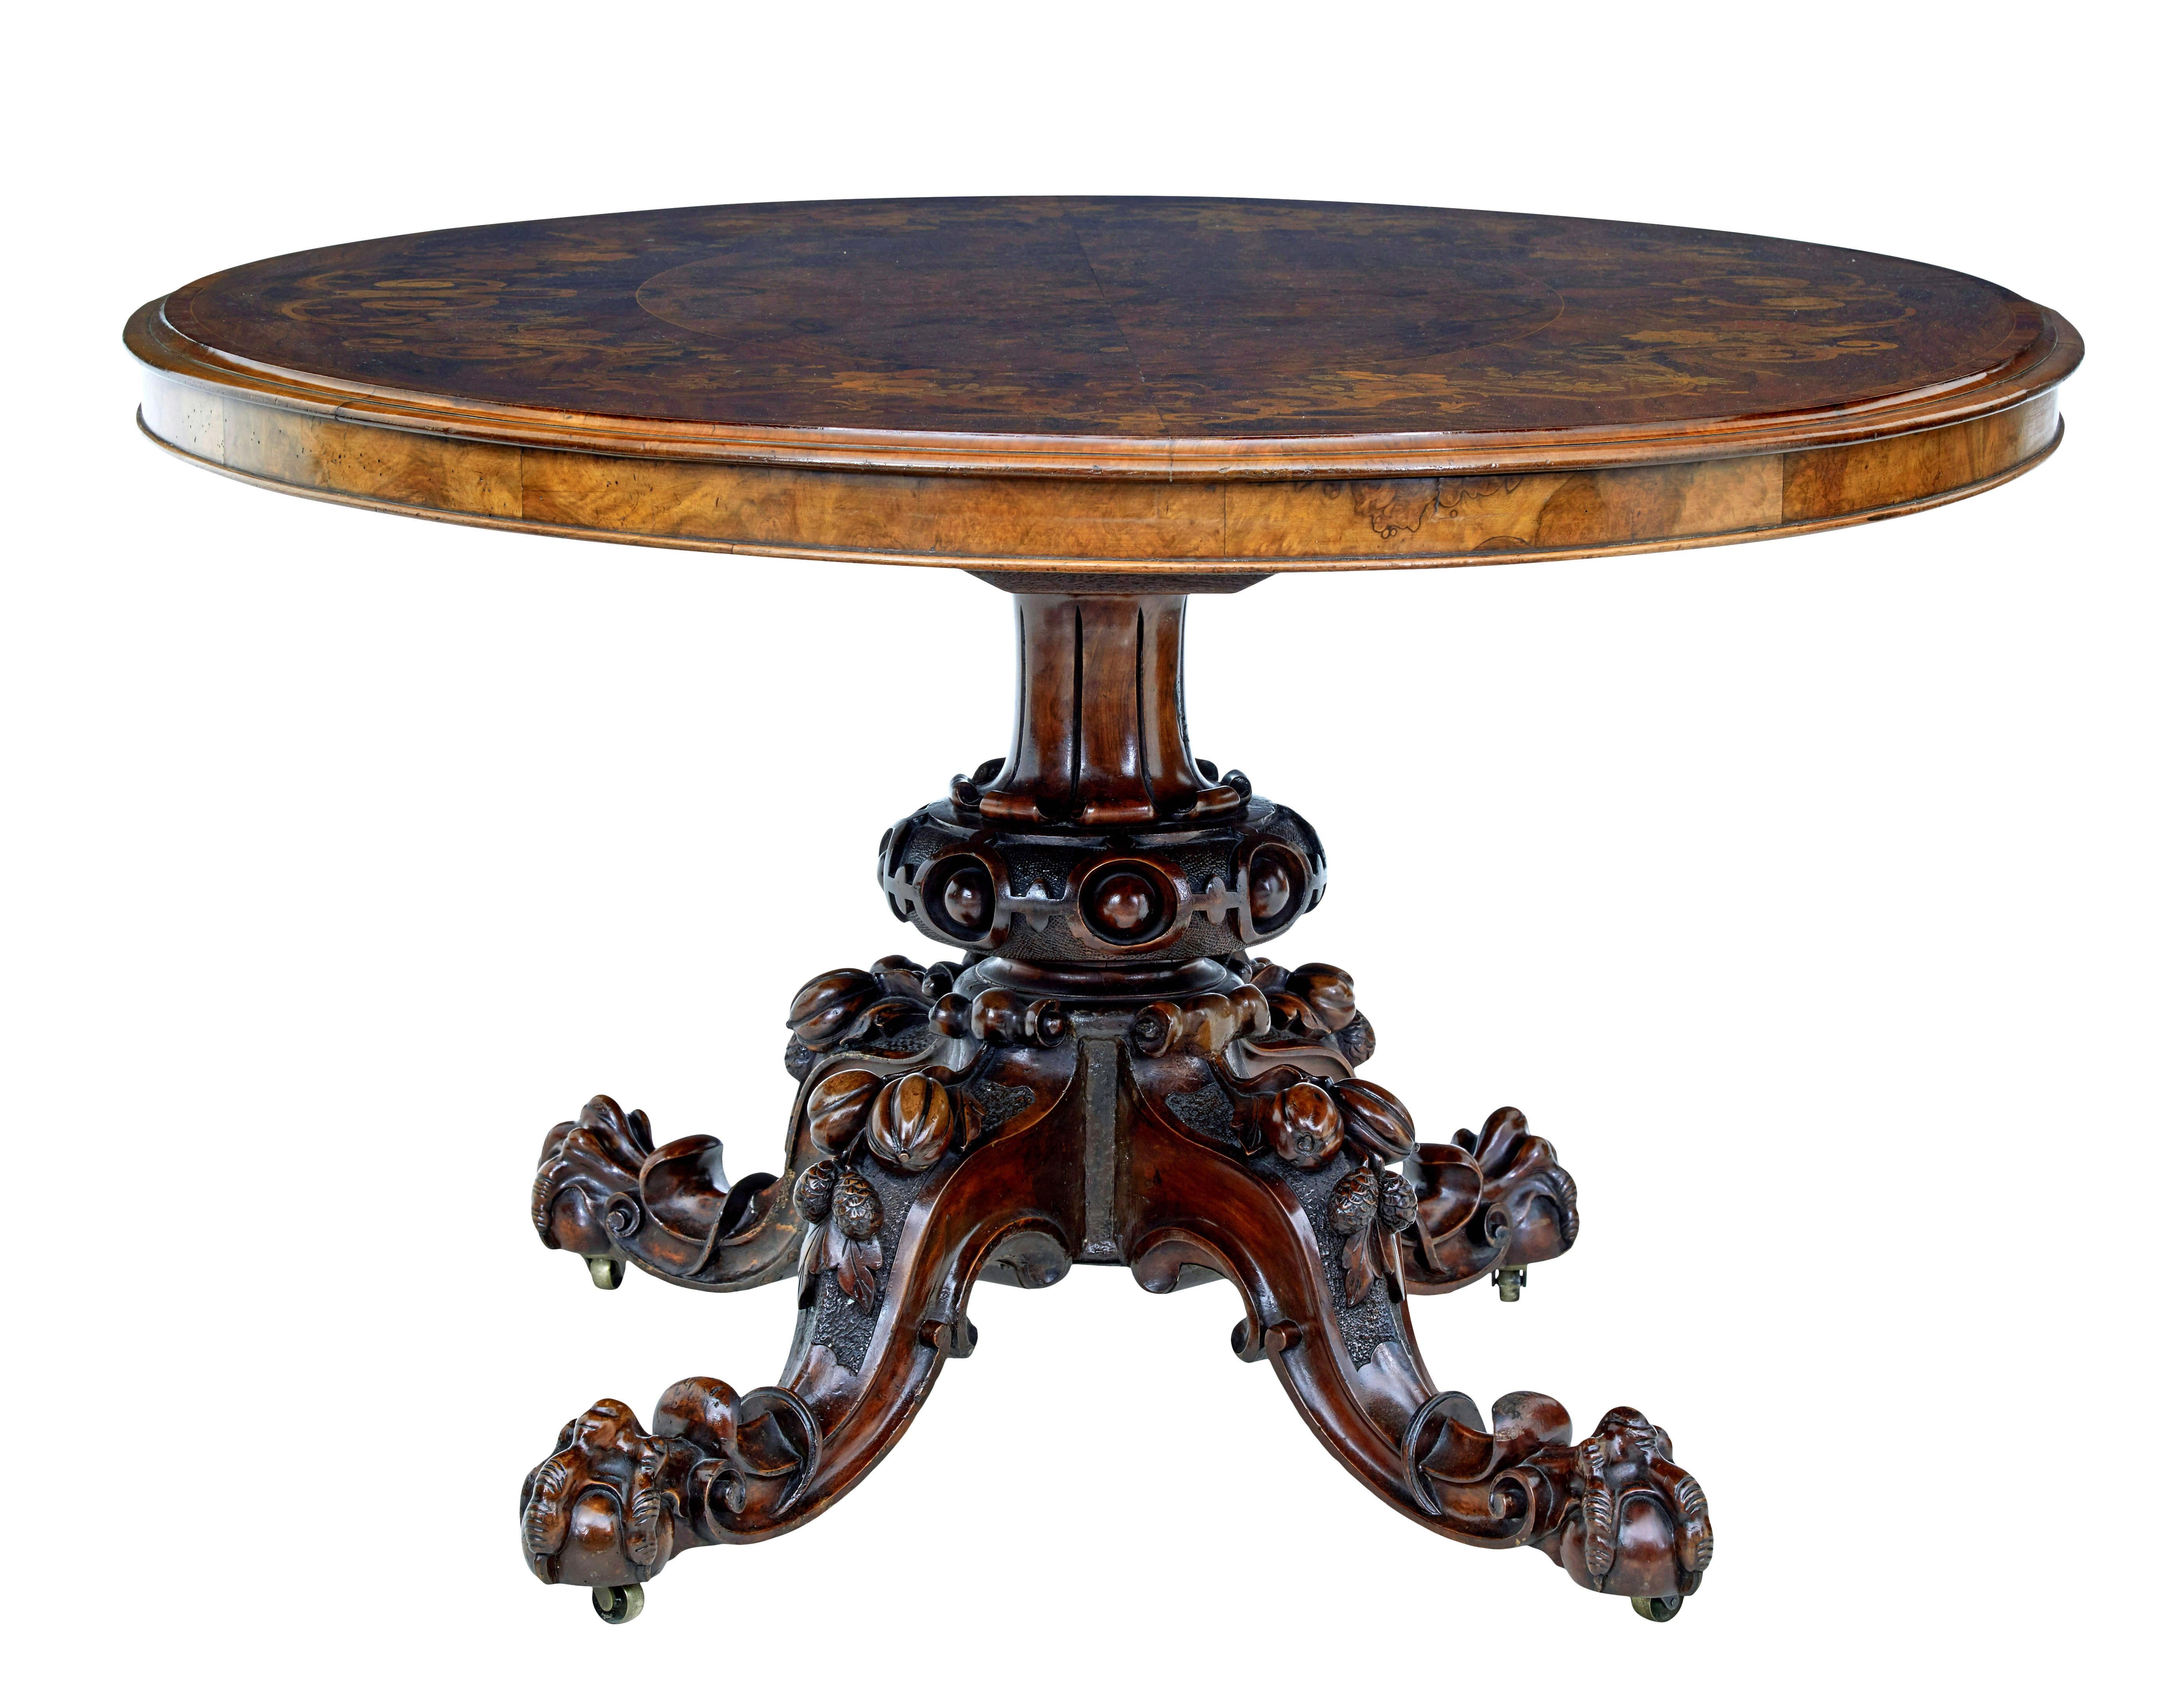 19th century inlaid walnut tilt top table circa 1860

Fine quality oval tilt top occasional table, often known as a loo table due to a popular card game starting in the 18th century.  This table is of slightly more grander scale.

Burr walnut top,